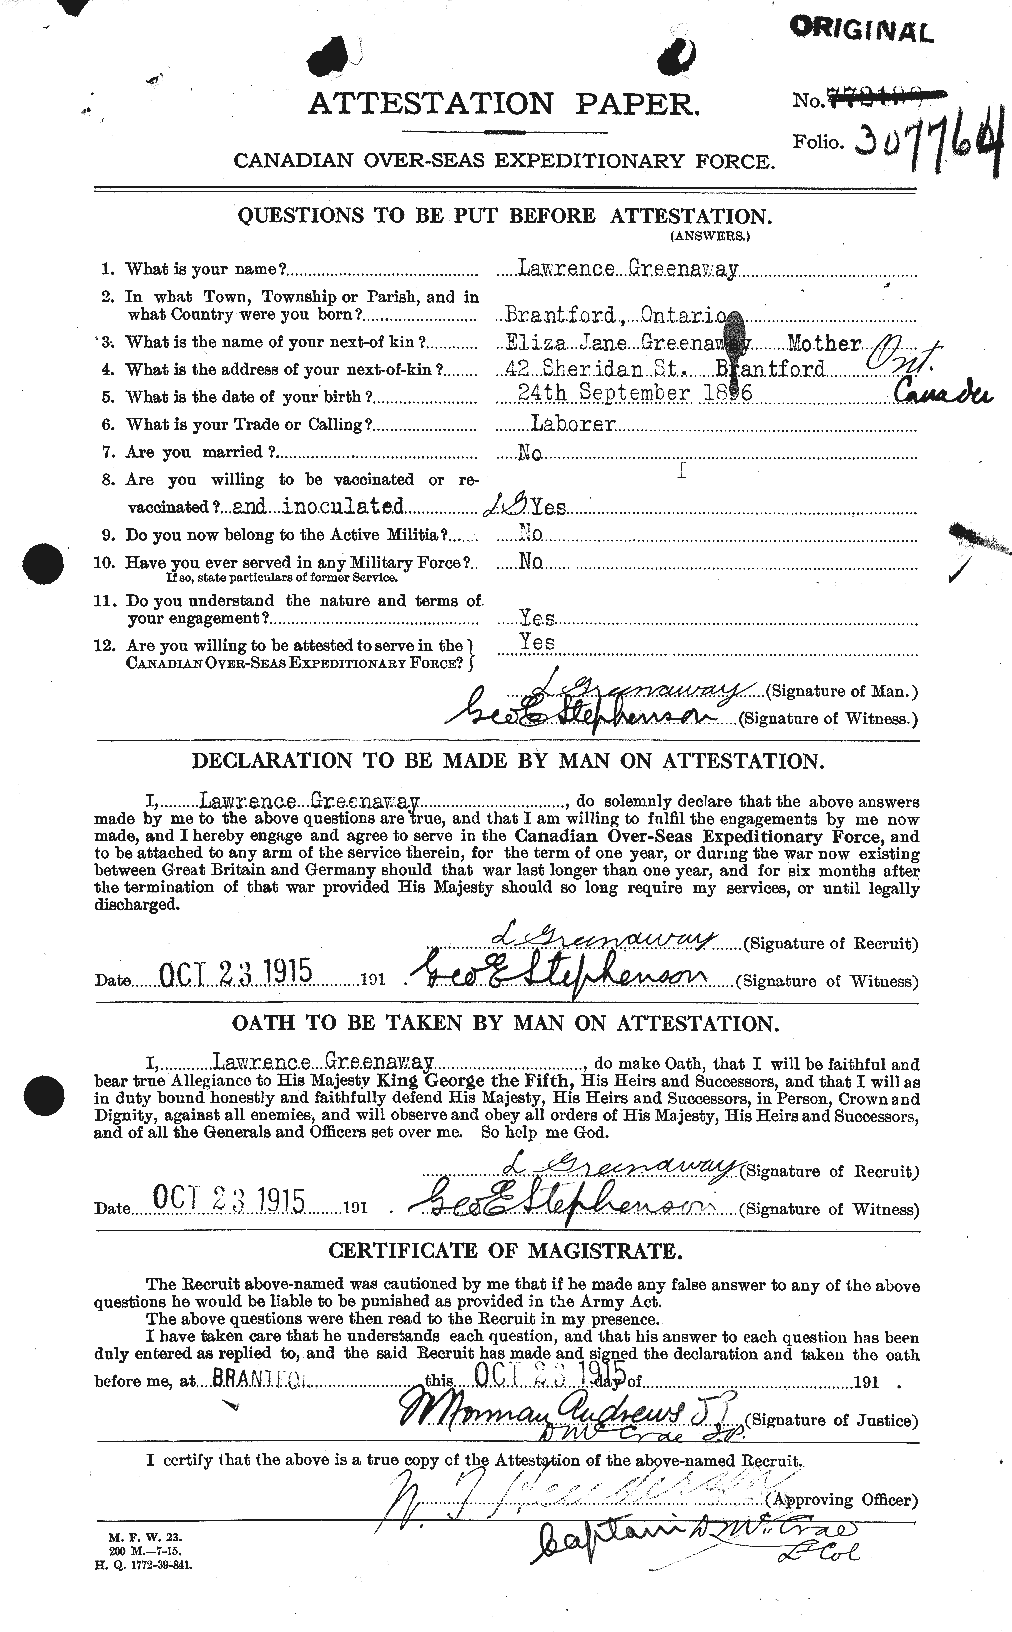 Personnel Records of the First World War - CEF 362324a